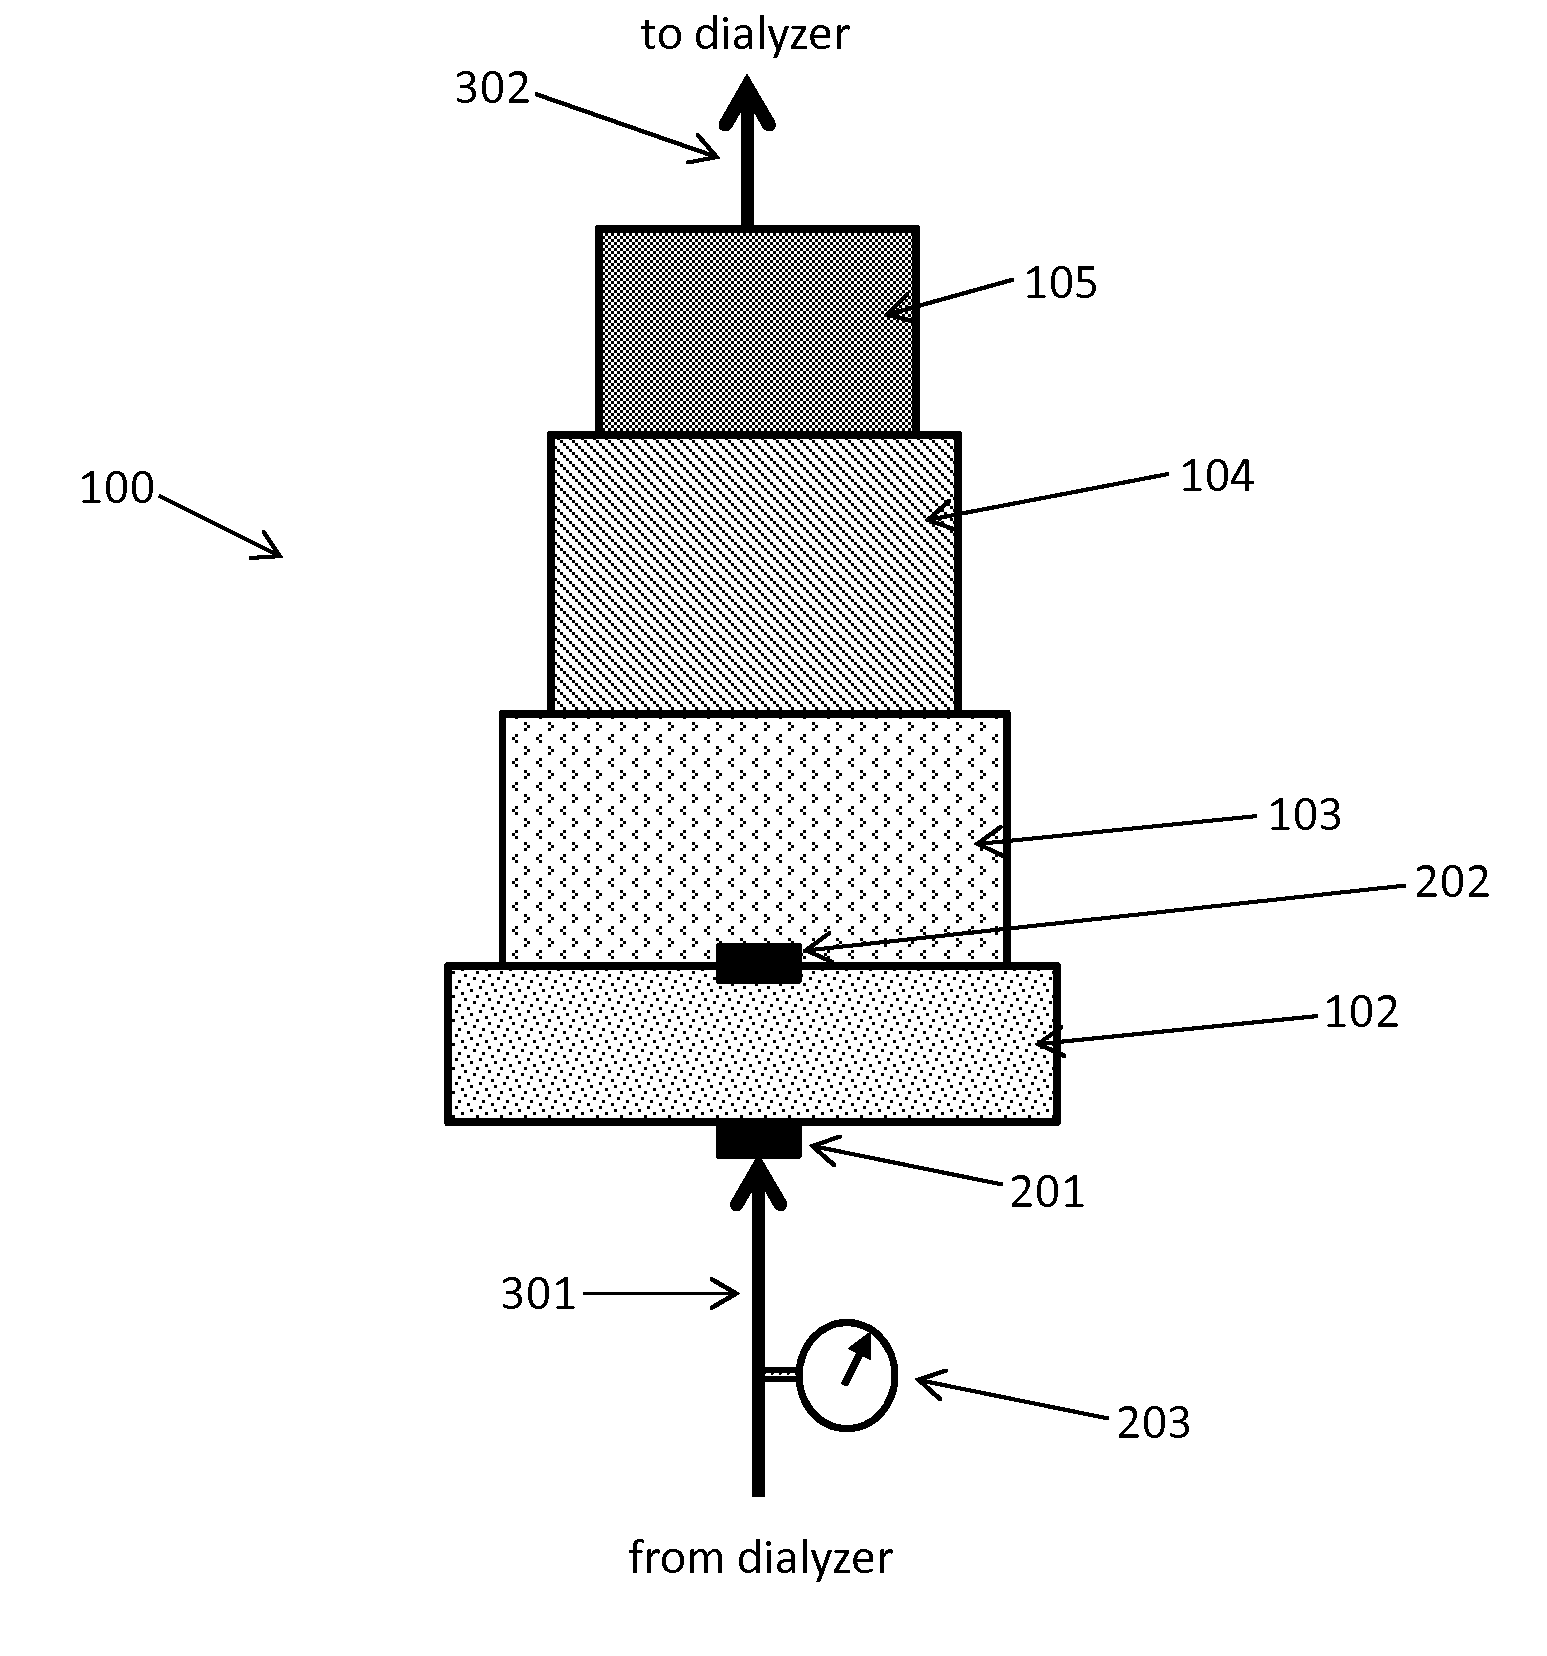 Sorbent cartridge to measure solute concentrations